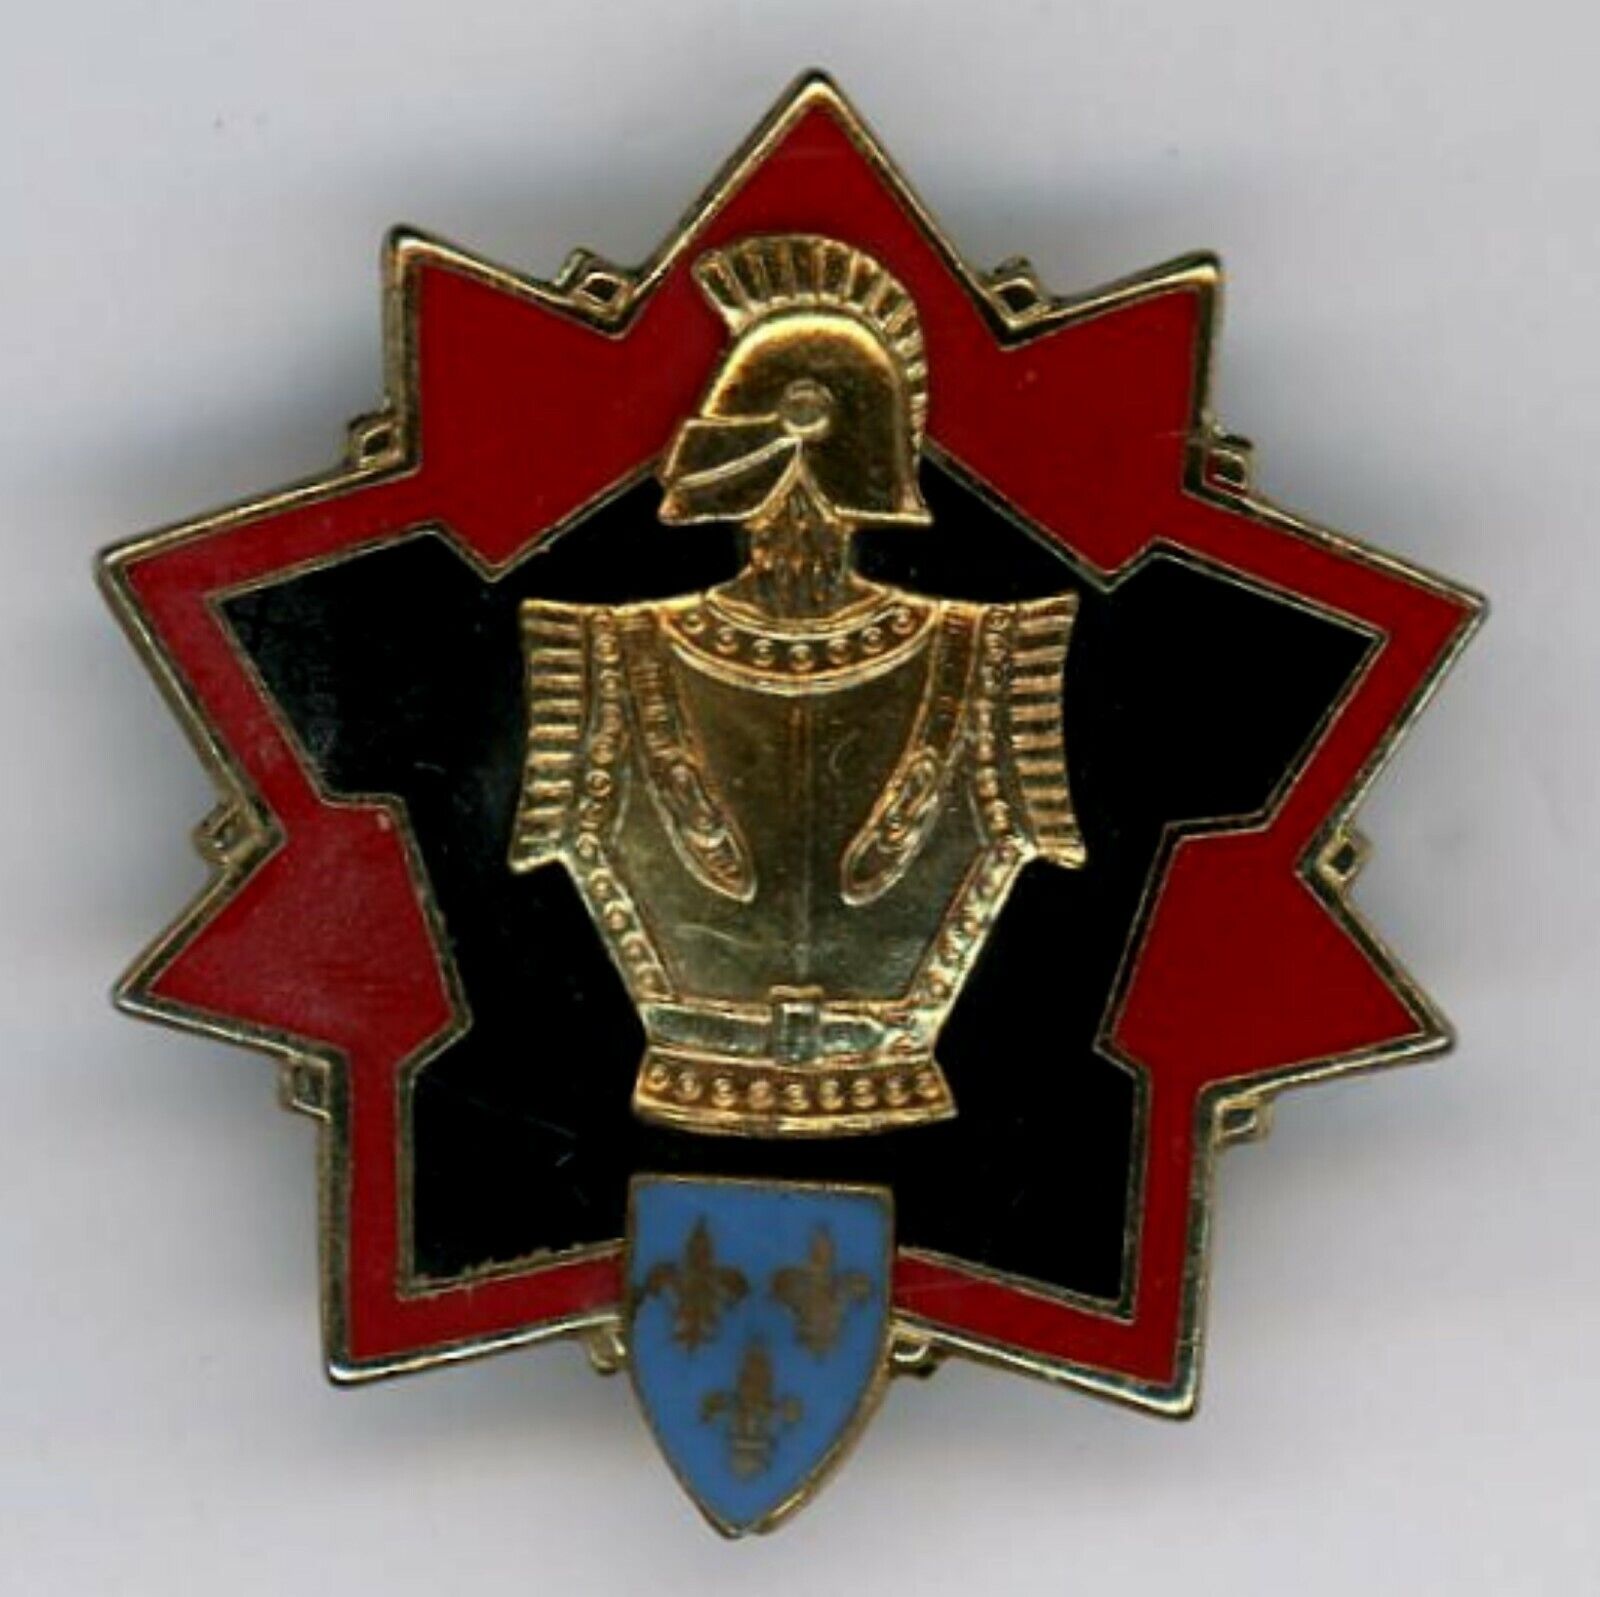 Directorate of Personal Works of the 1st Military Region G 2116